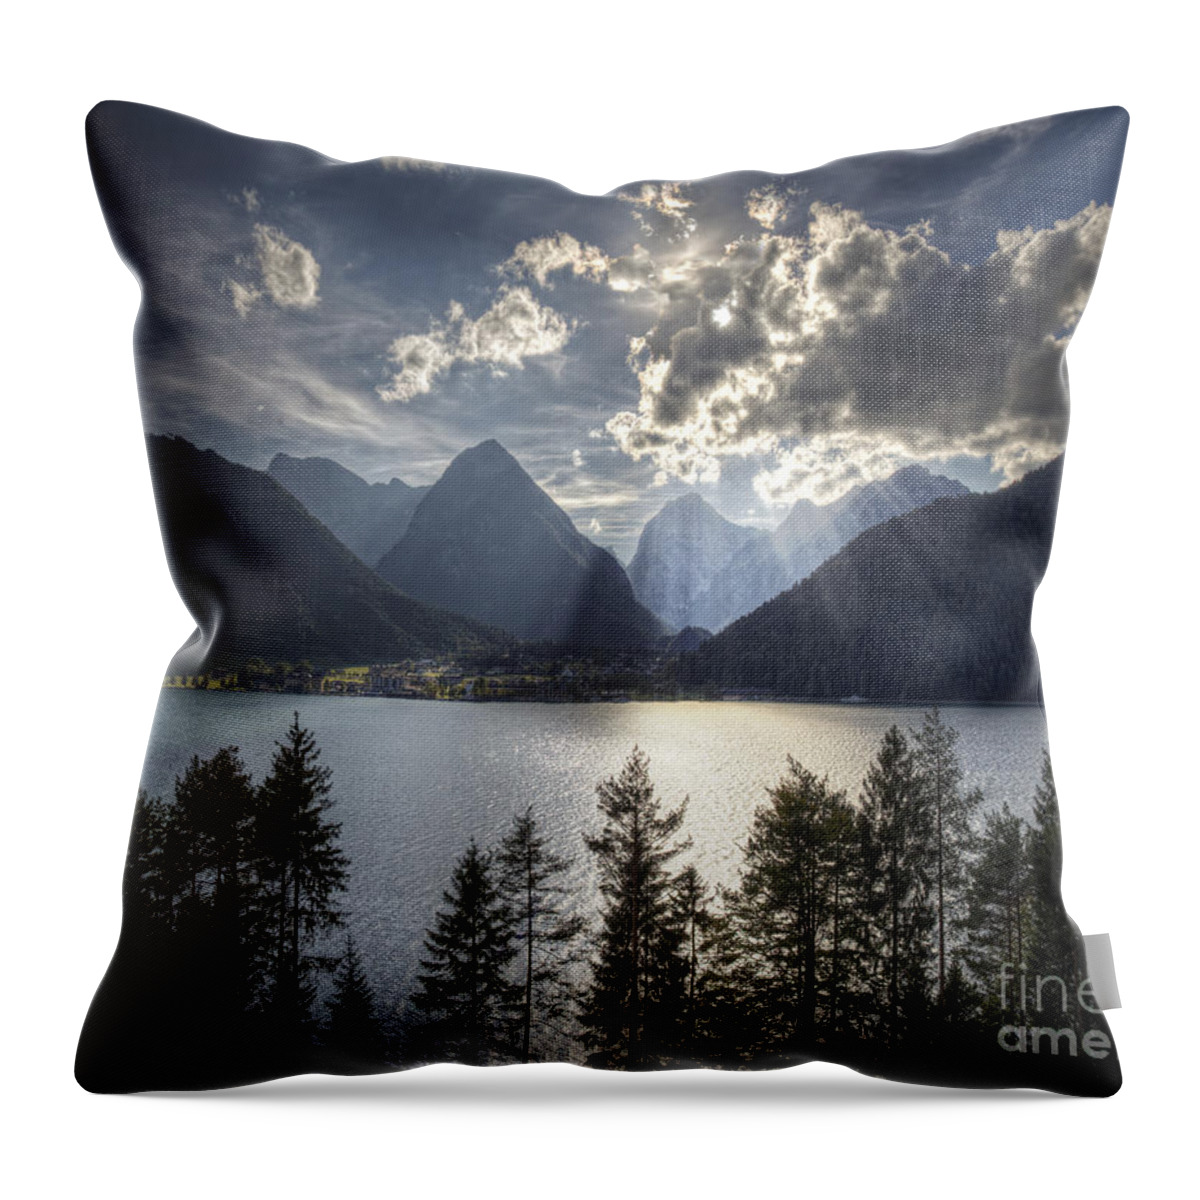 Austria Throw Pillow featuring the photograph Reach For The Light by Edmund Nagele FRPS